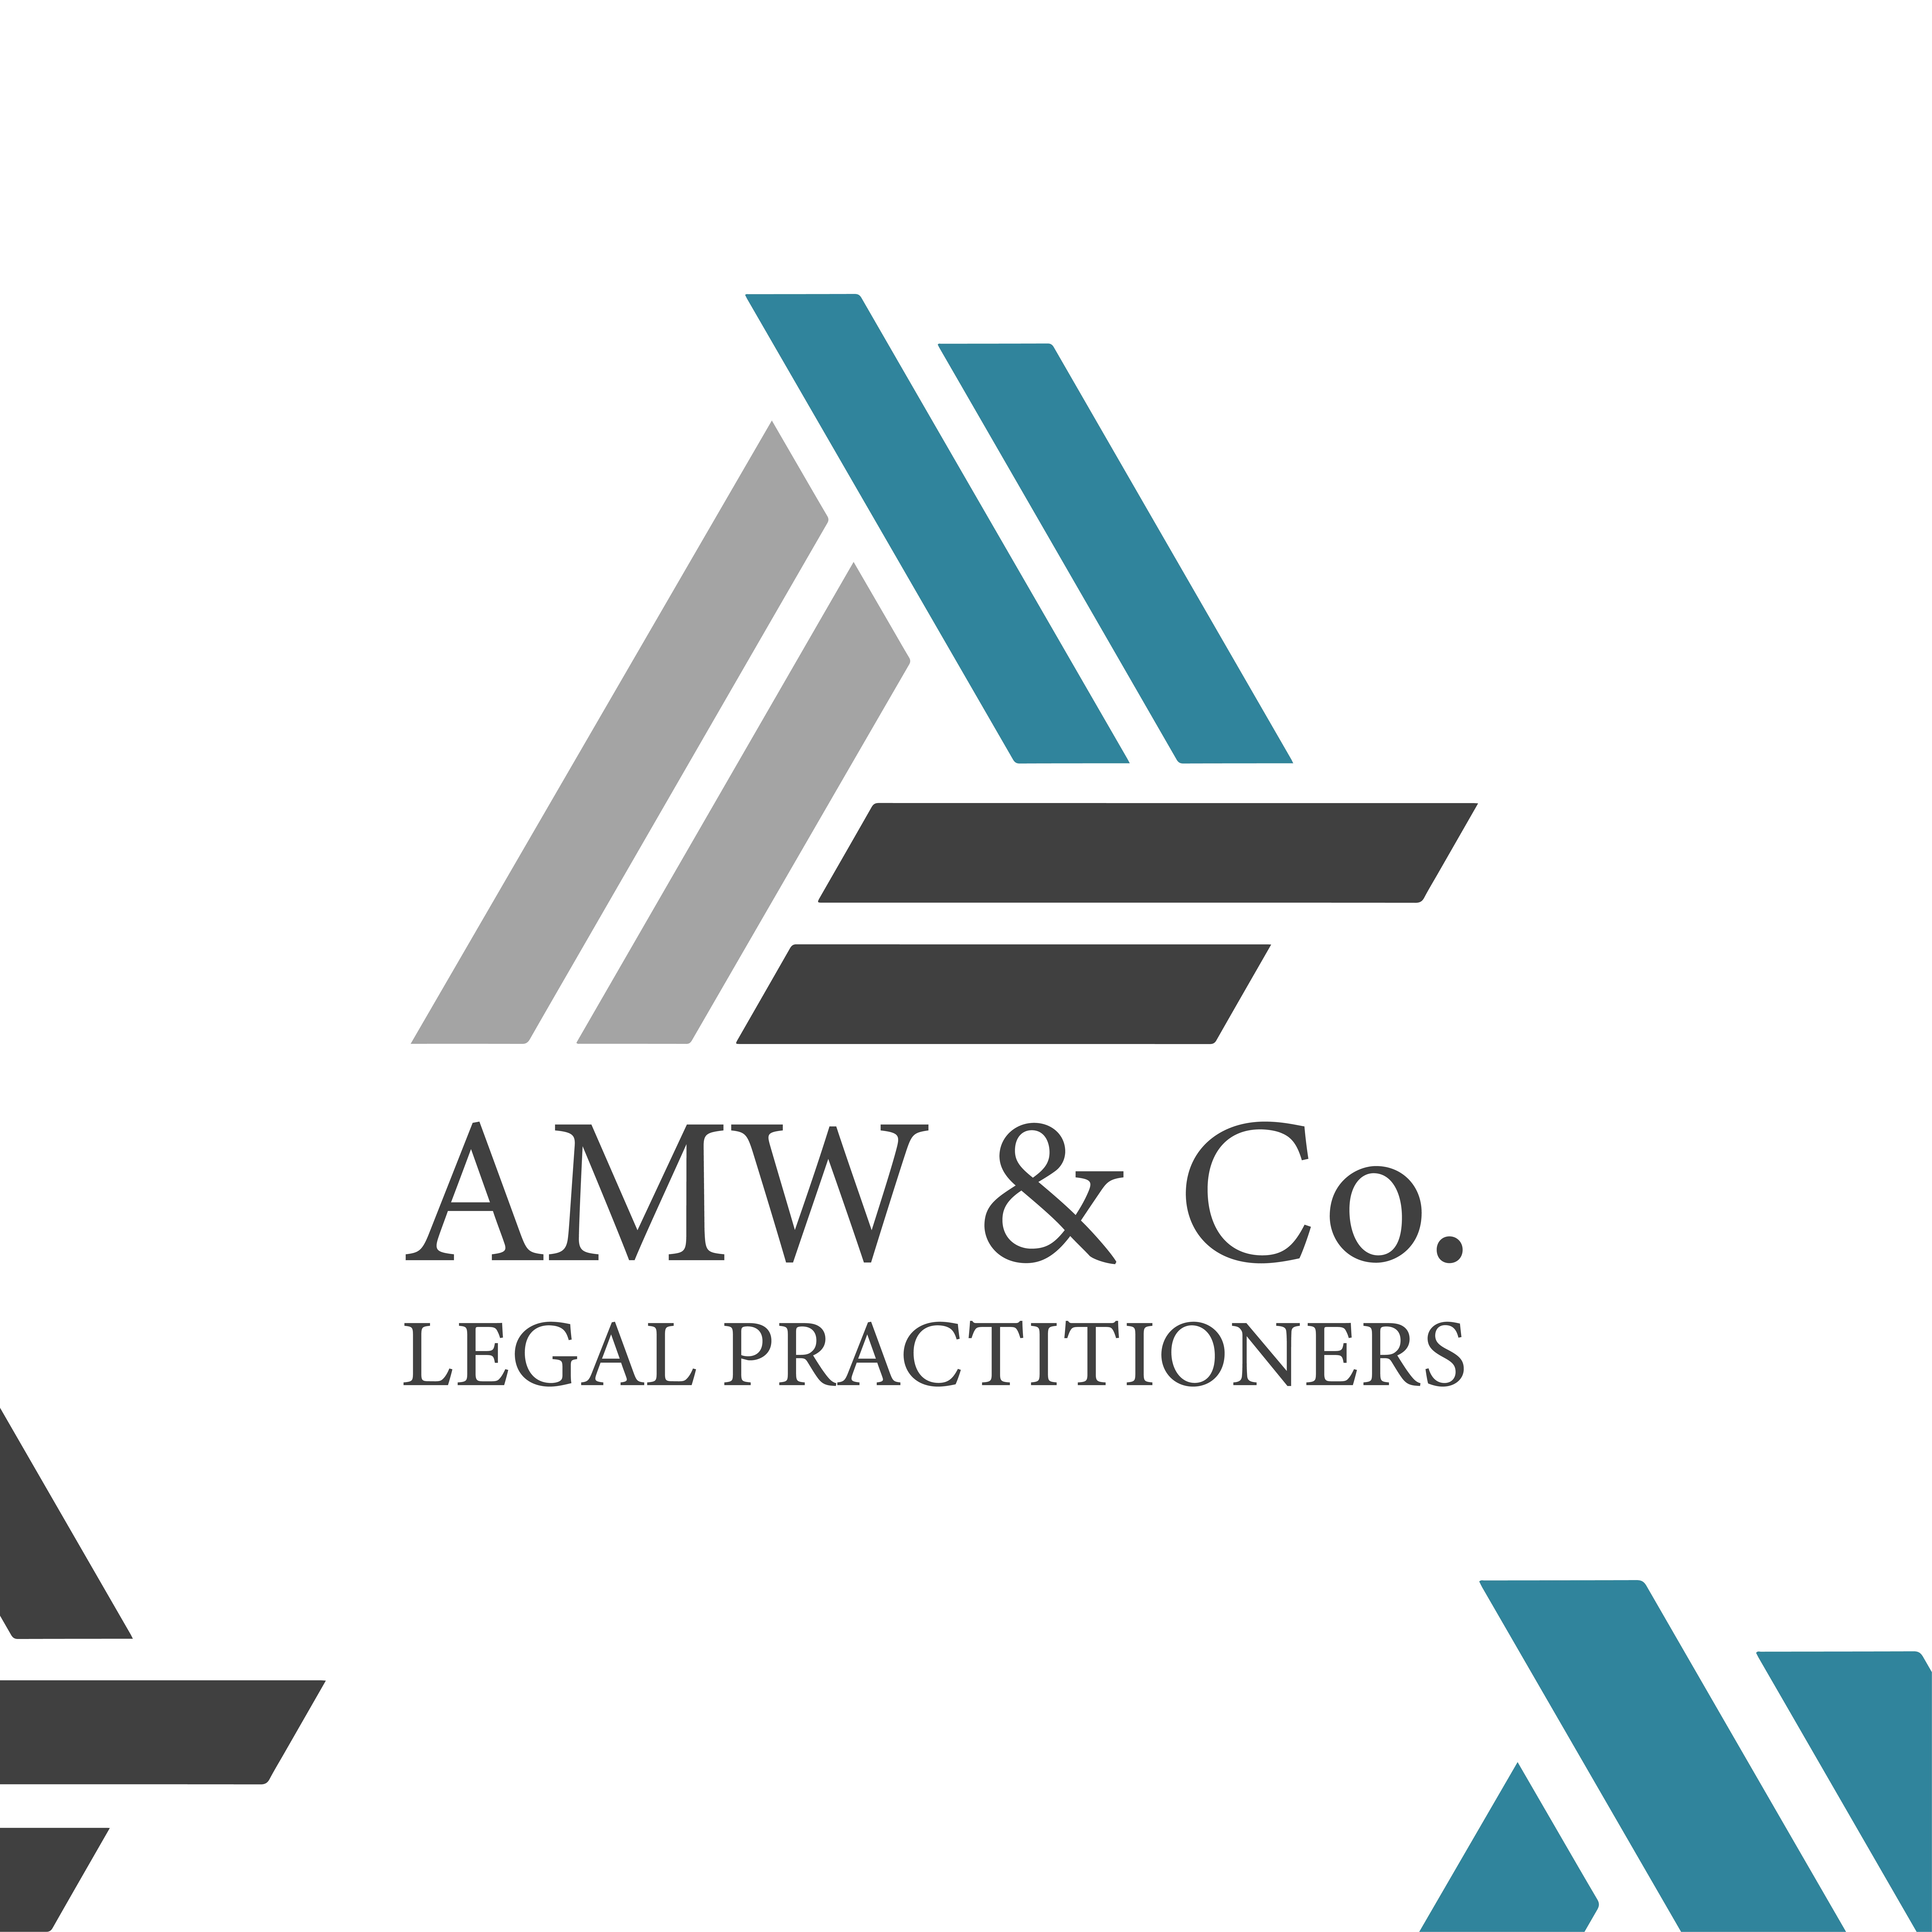 AMW & Co Legal Practitioners company logo